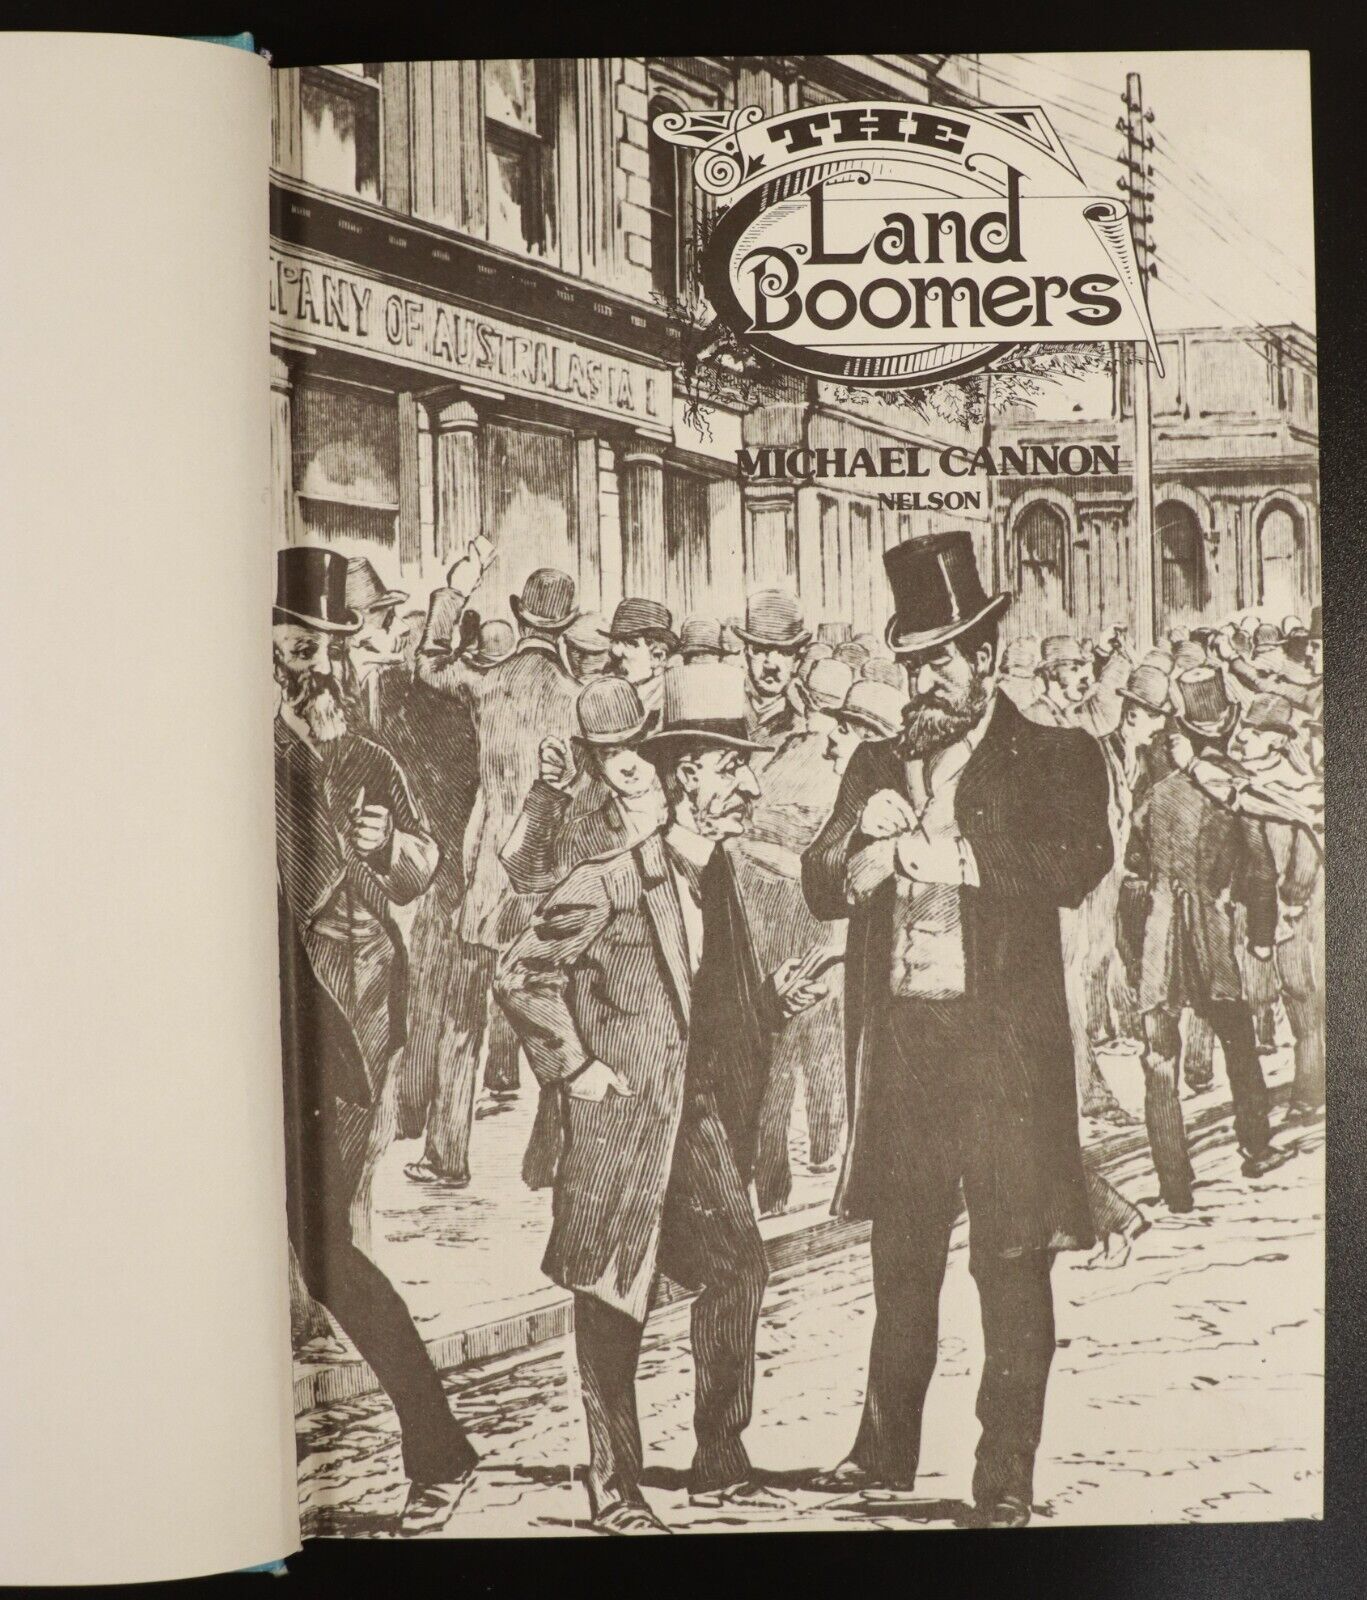 1976 The Land Boomers: Illustrated Melbourne History Book Michael Cannon